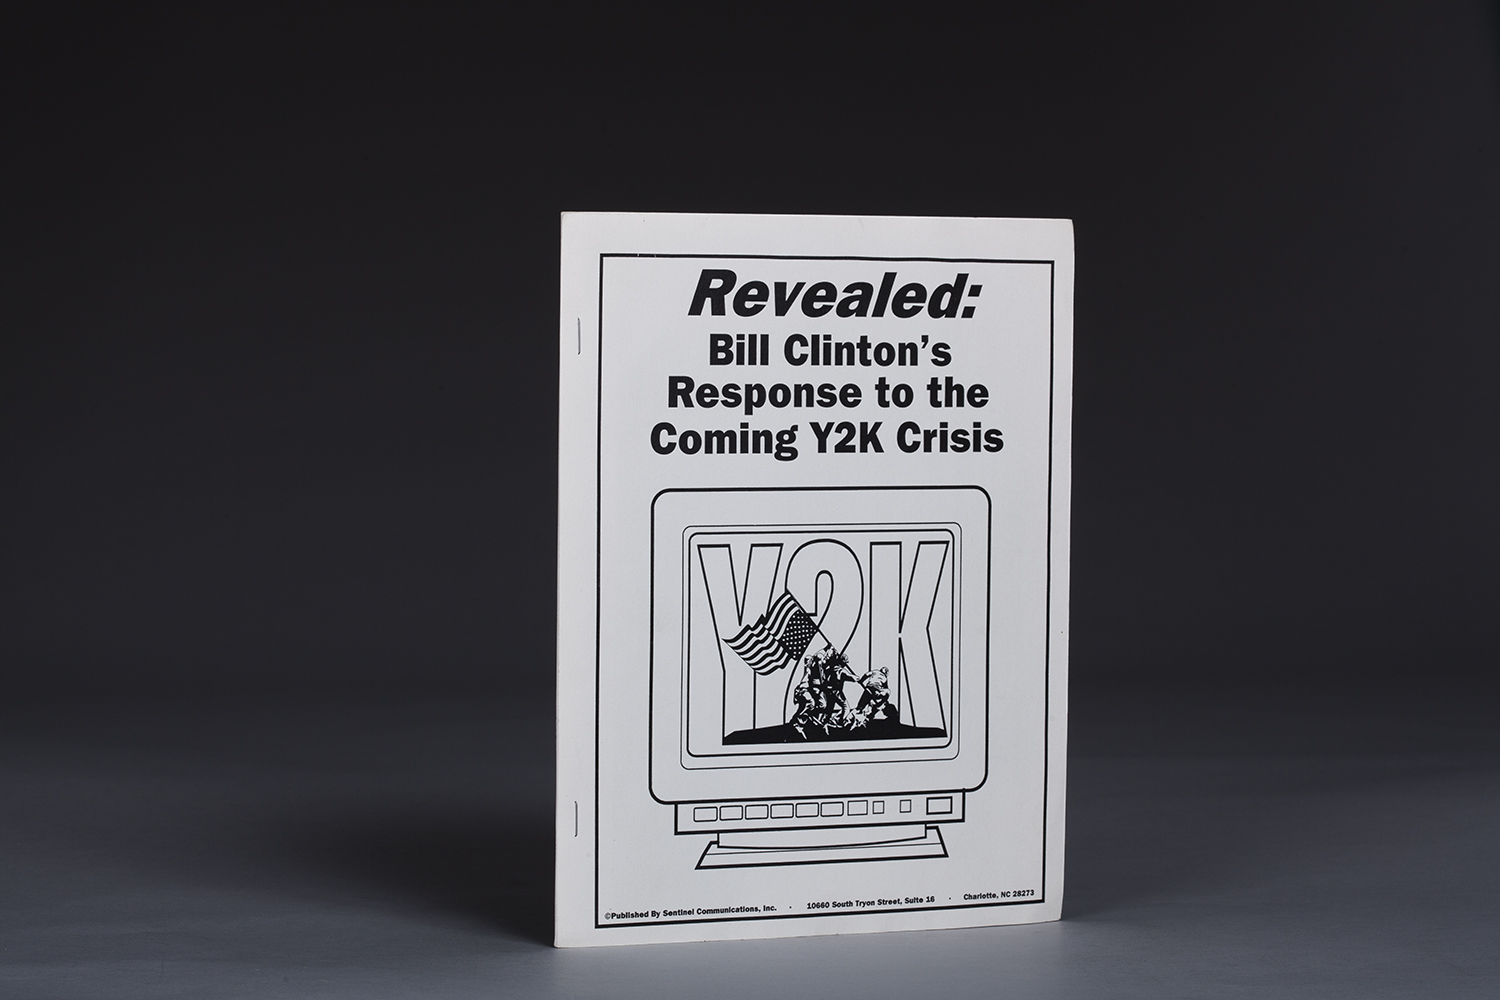 Revealed - Bill Clinton's Response to the Coming Y2K Crisis - 0714 Cover.jpg